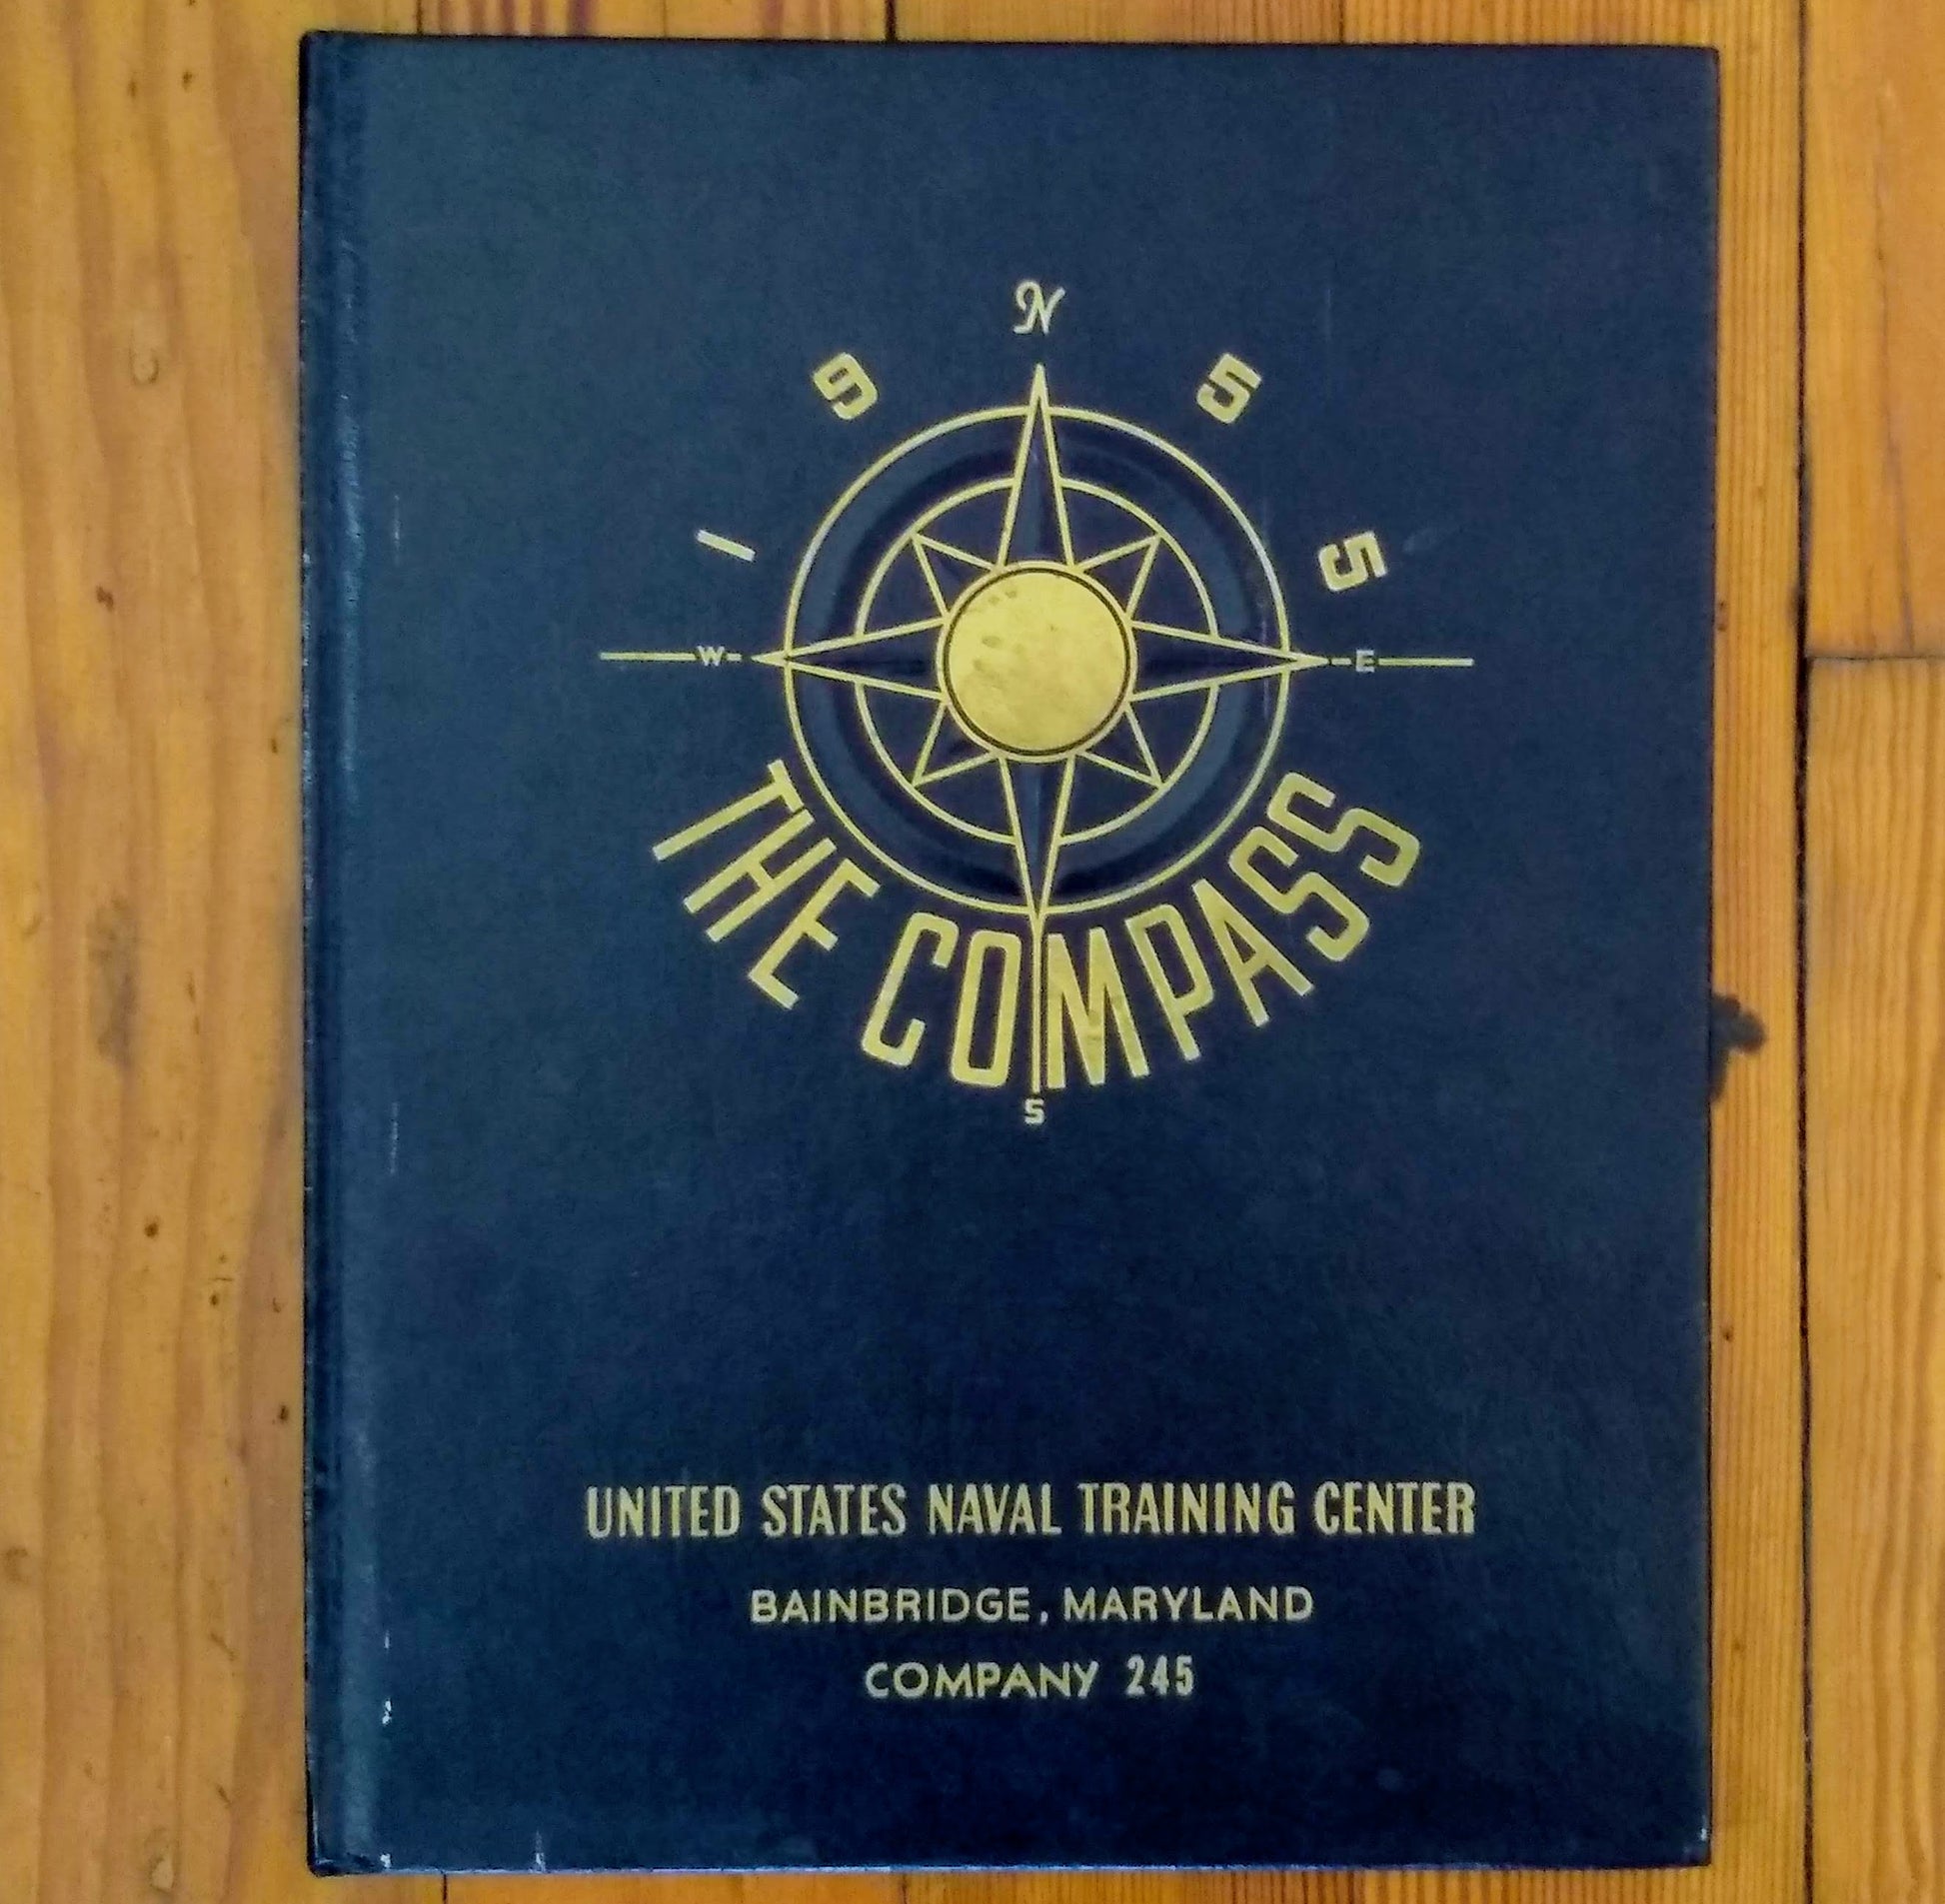 Book; The Compass, United States Naval Training Center, Company 245 - Annapolis Maritime Antiques